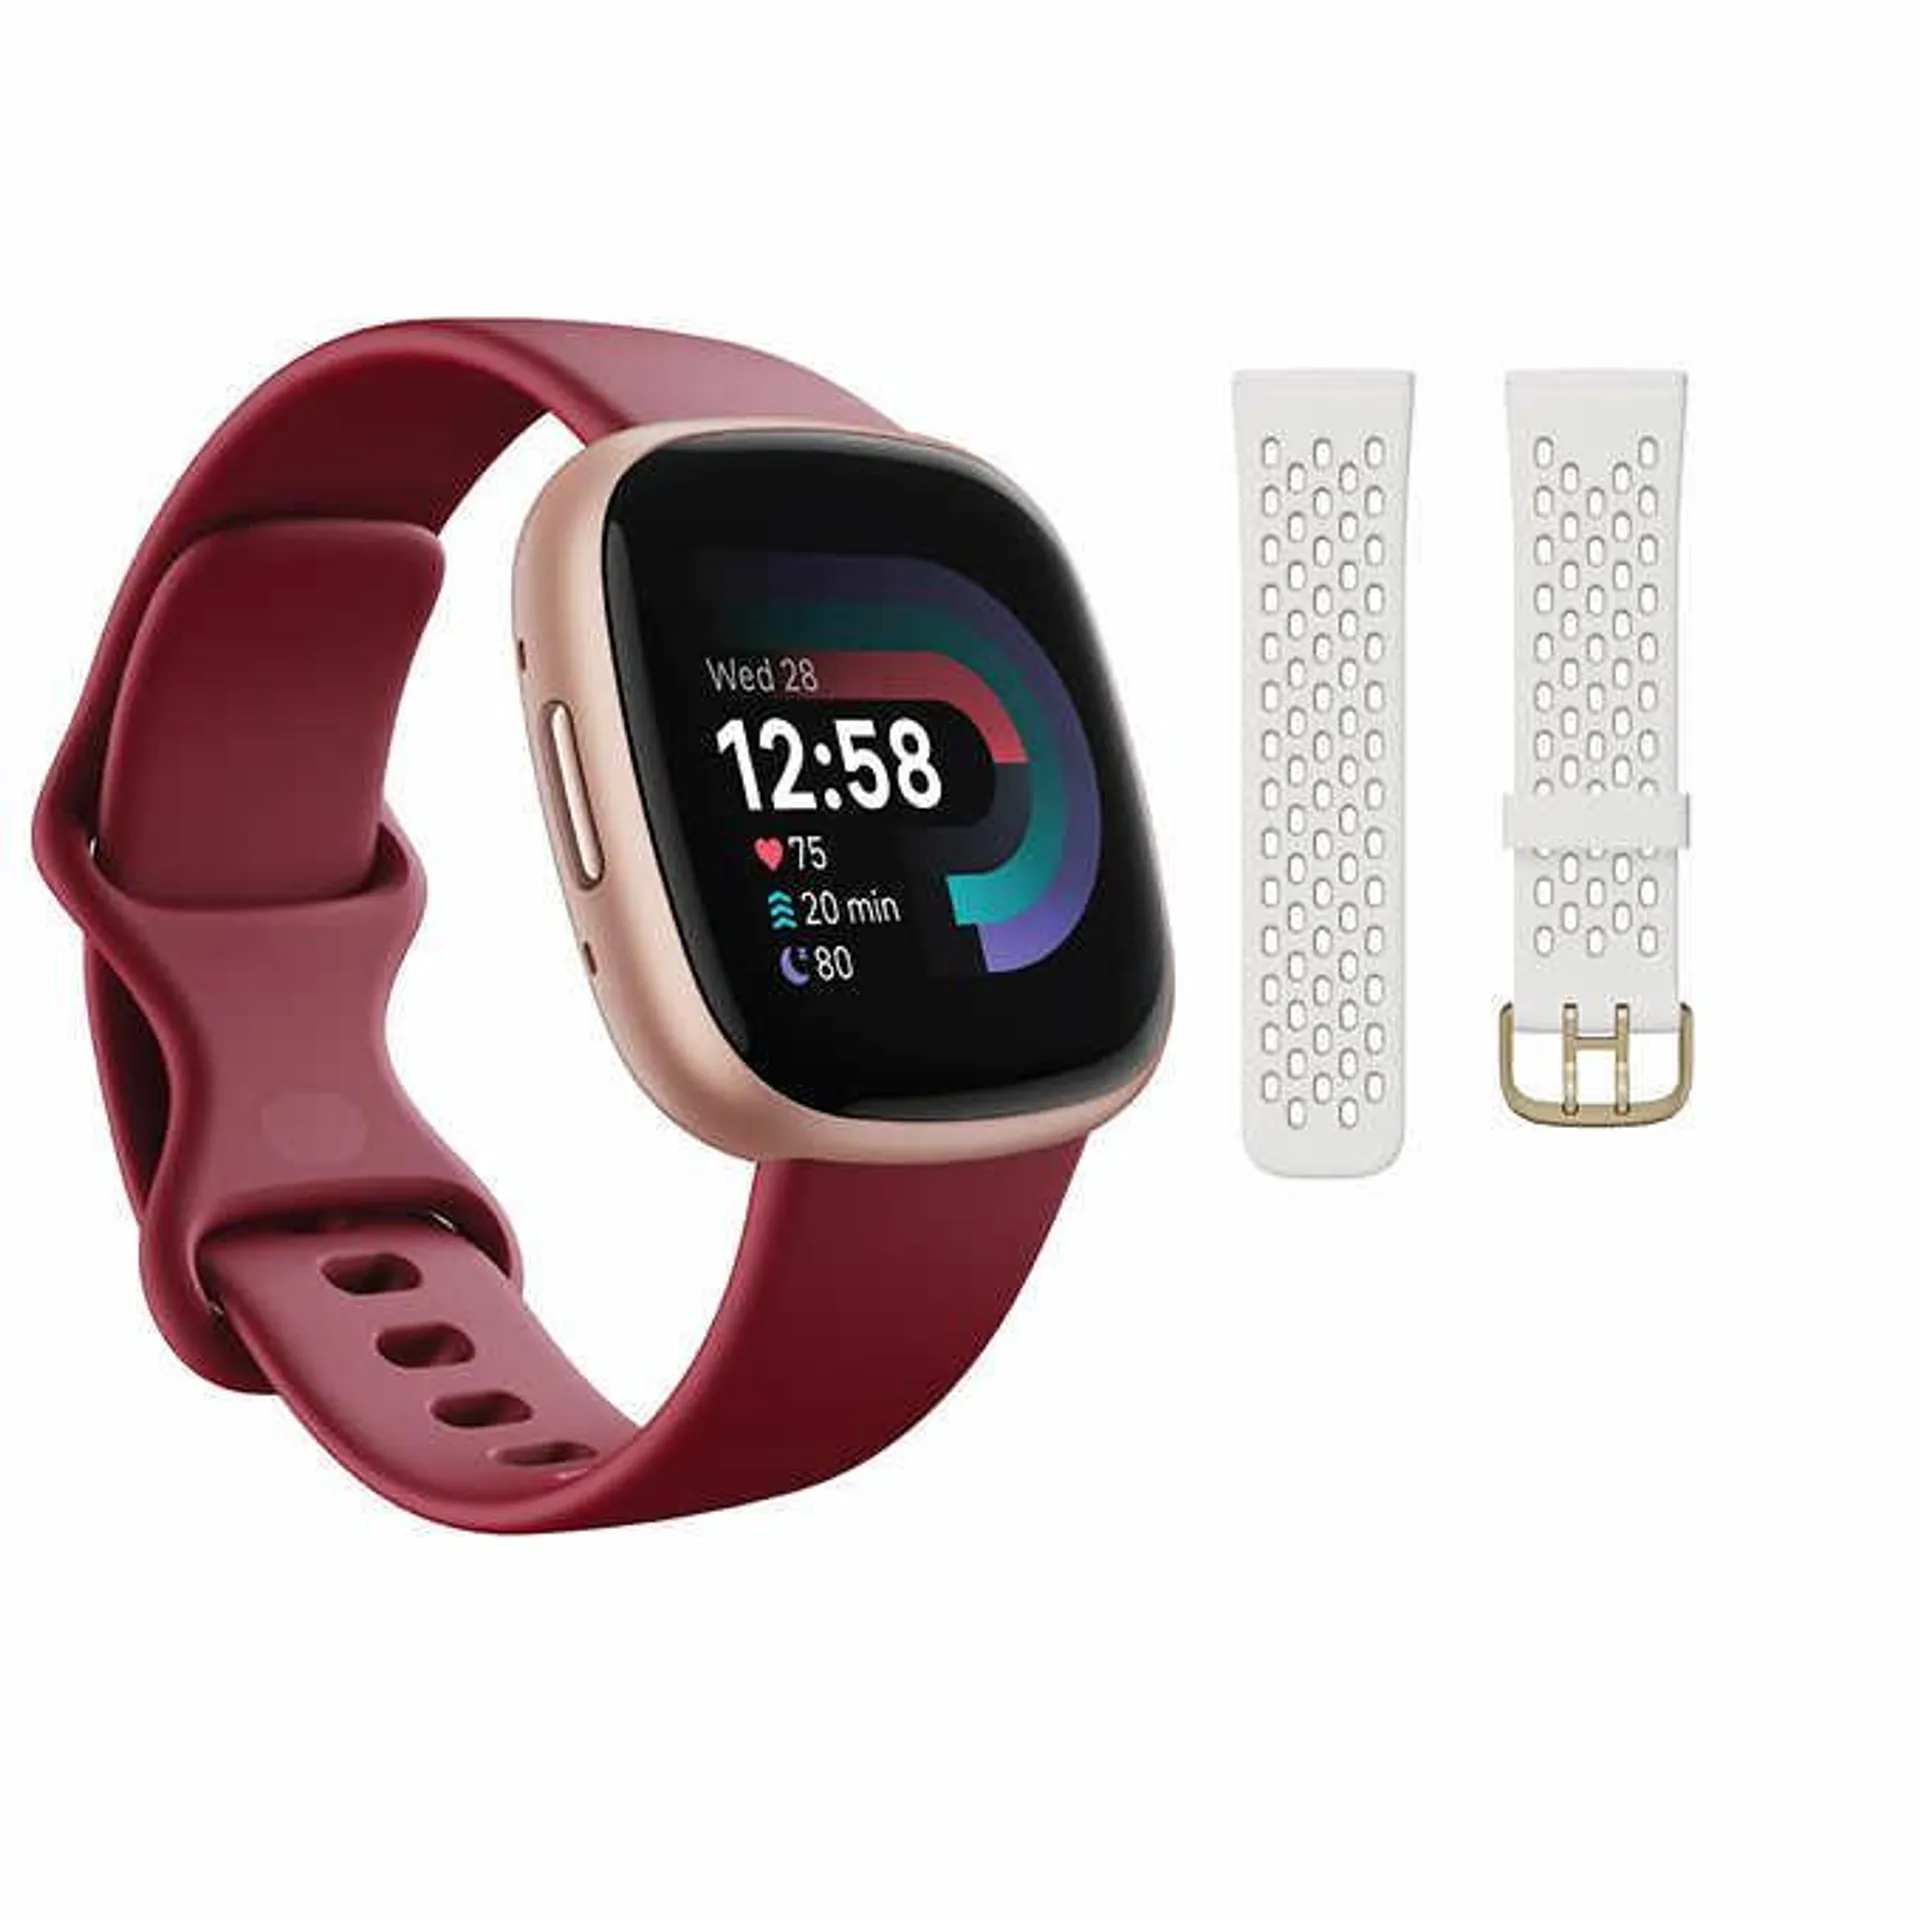 Fitbit Versa 4 Fitness Smartwatch - Additional Band Included